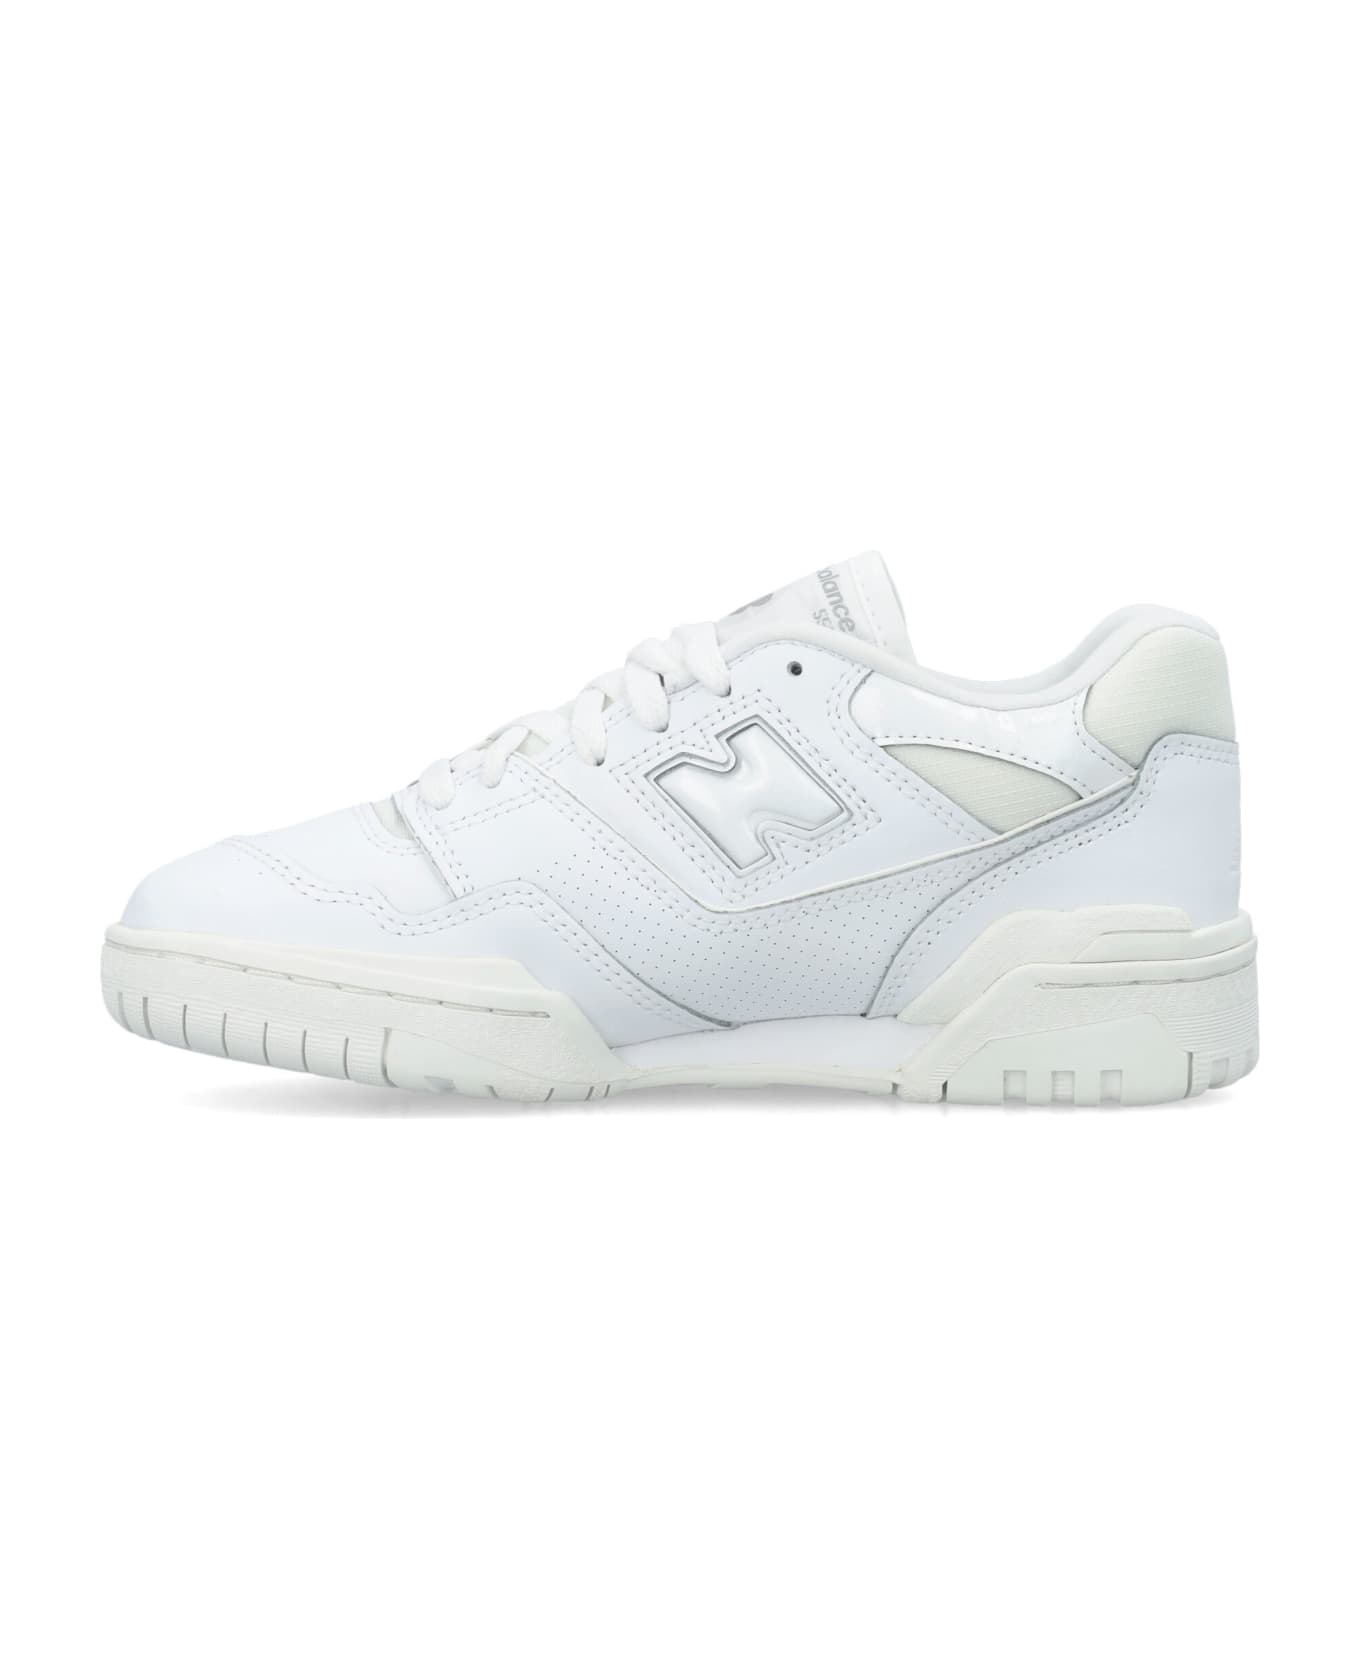 New Balance 550 Woman's Sneakers - WHITE PATENT スニーカー